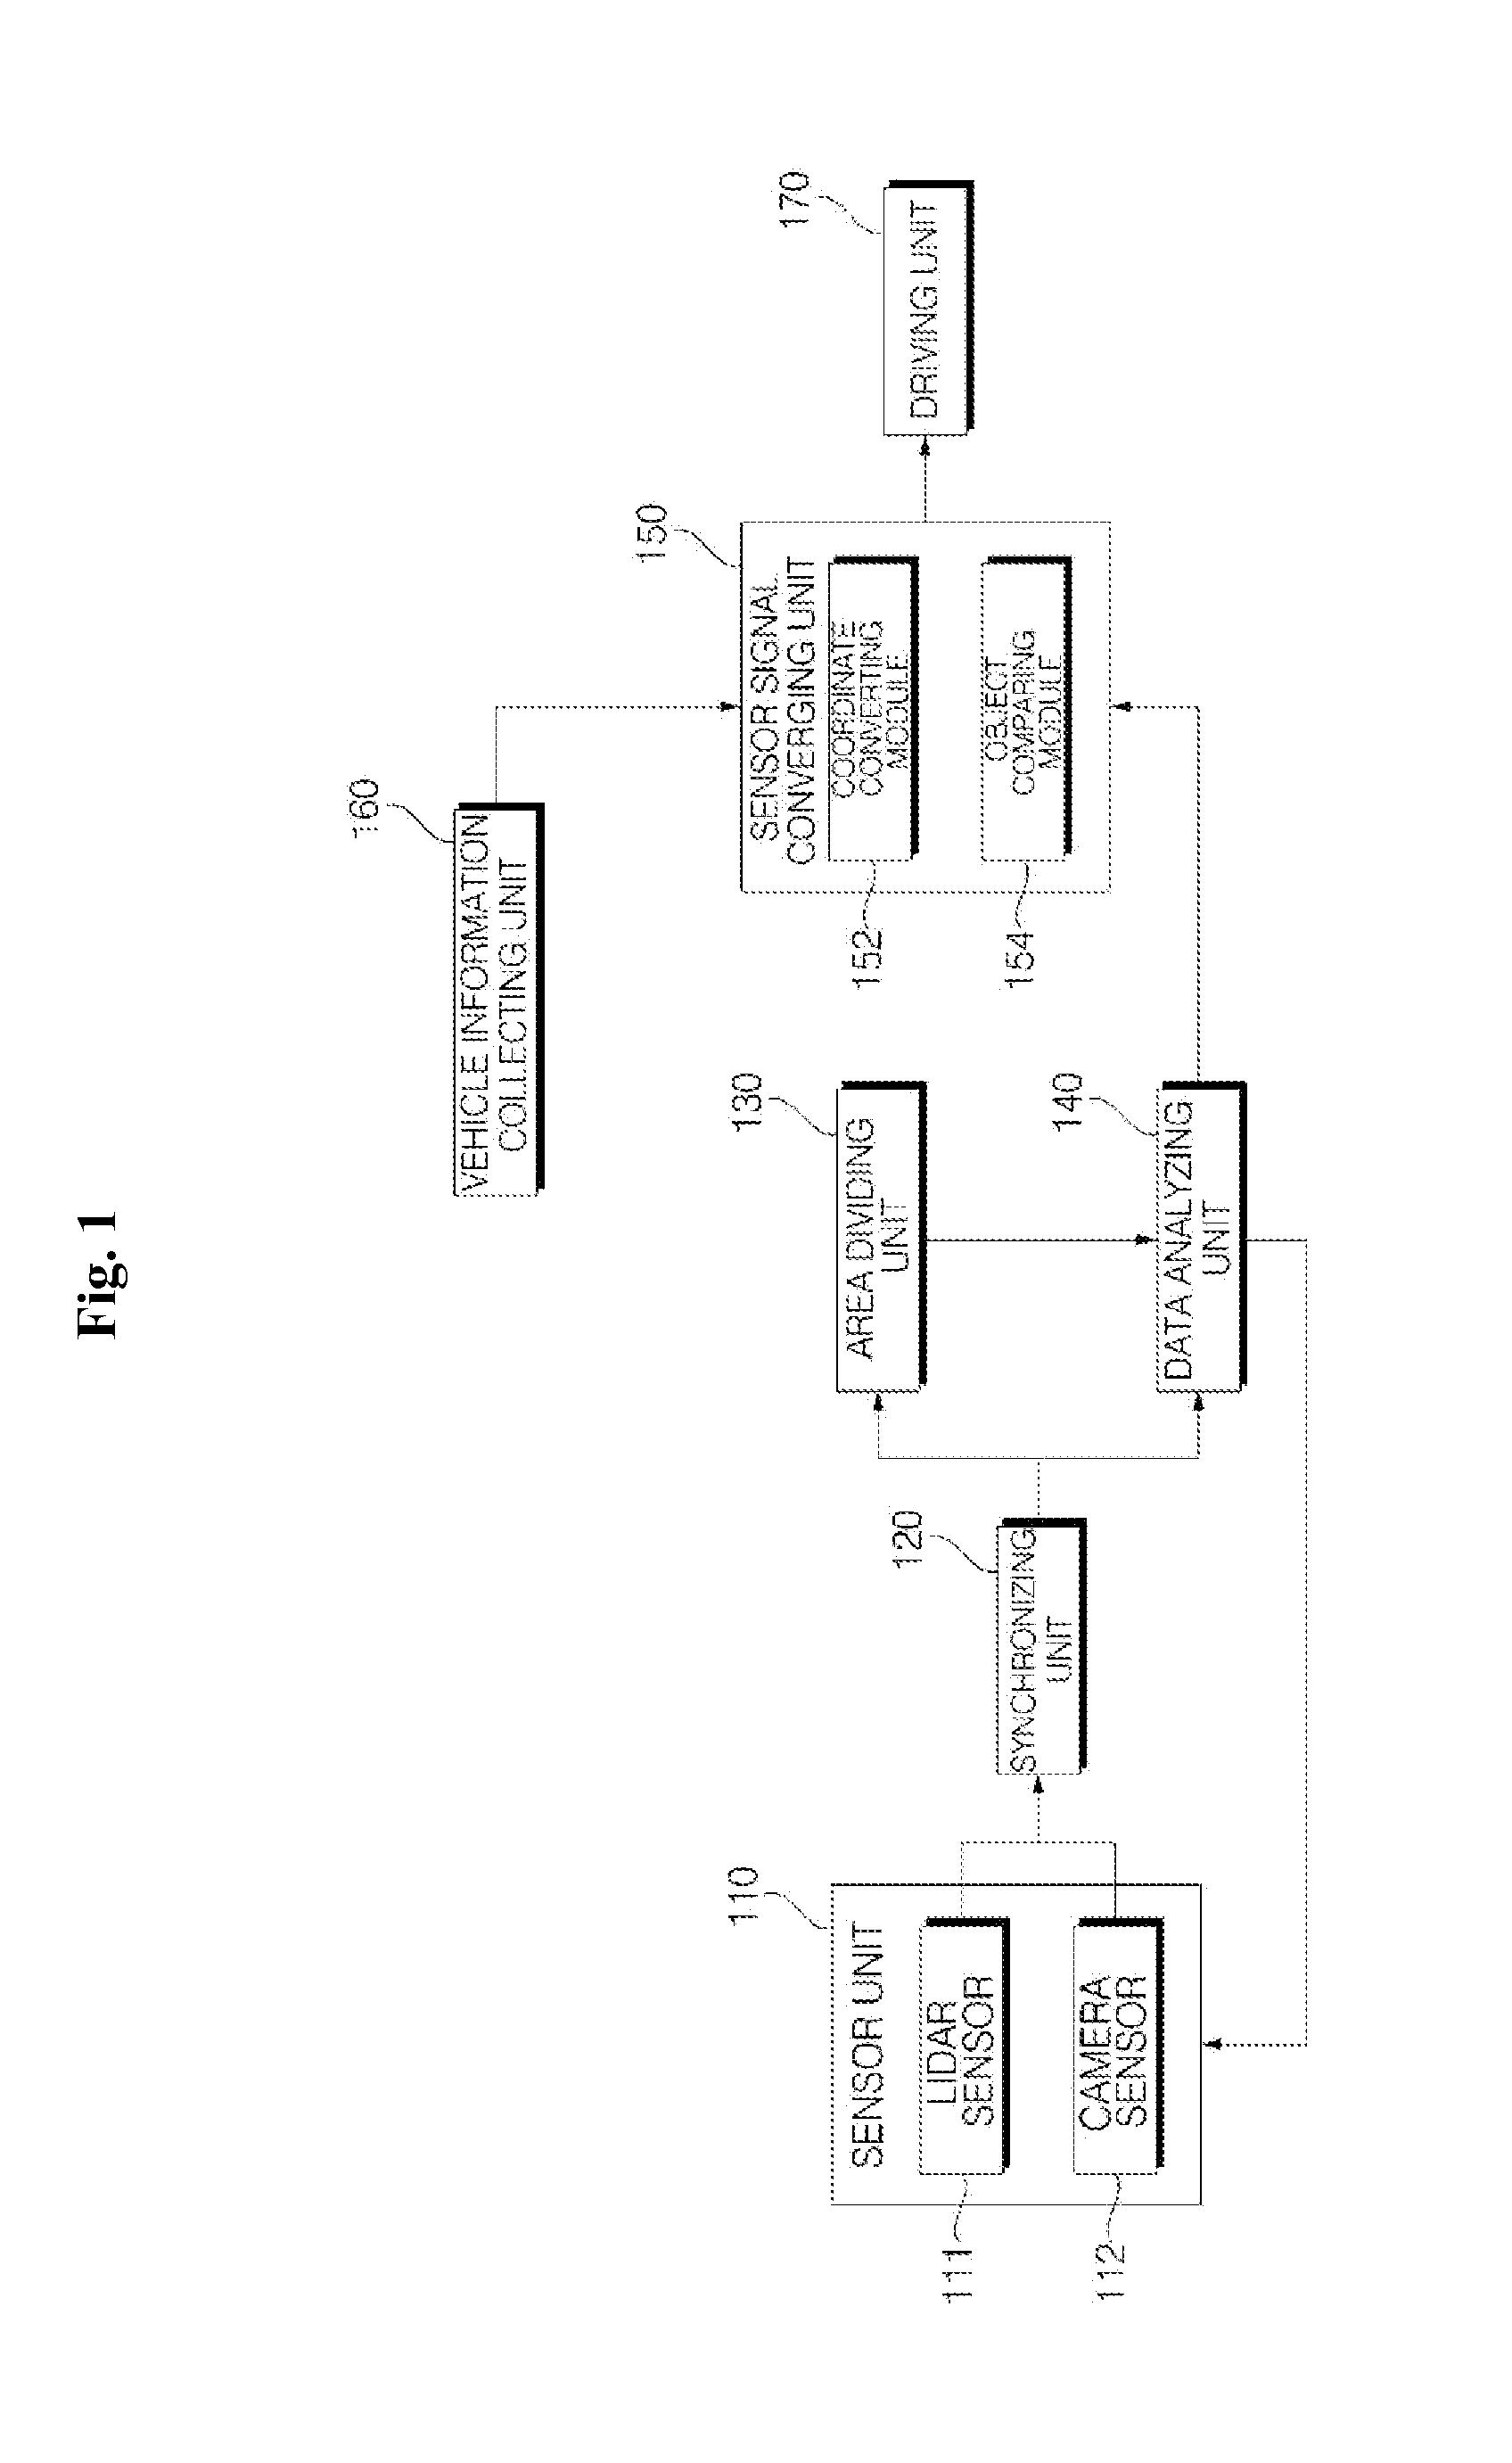 Object detecting apparatus, and method of operating the same